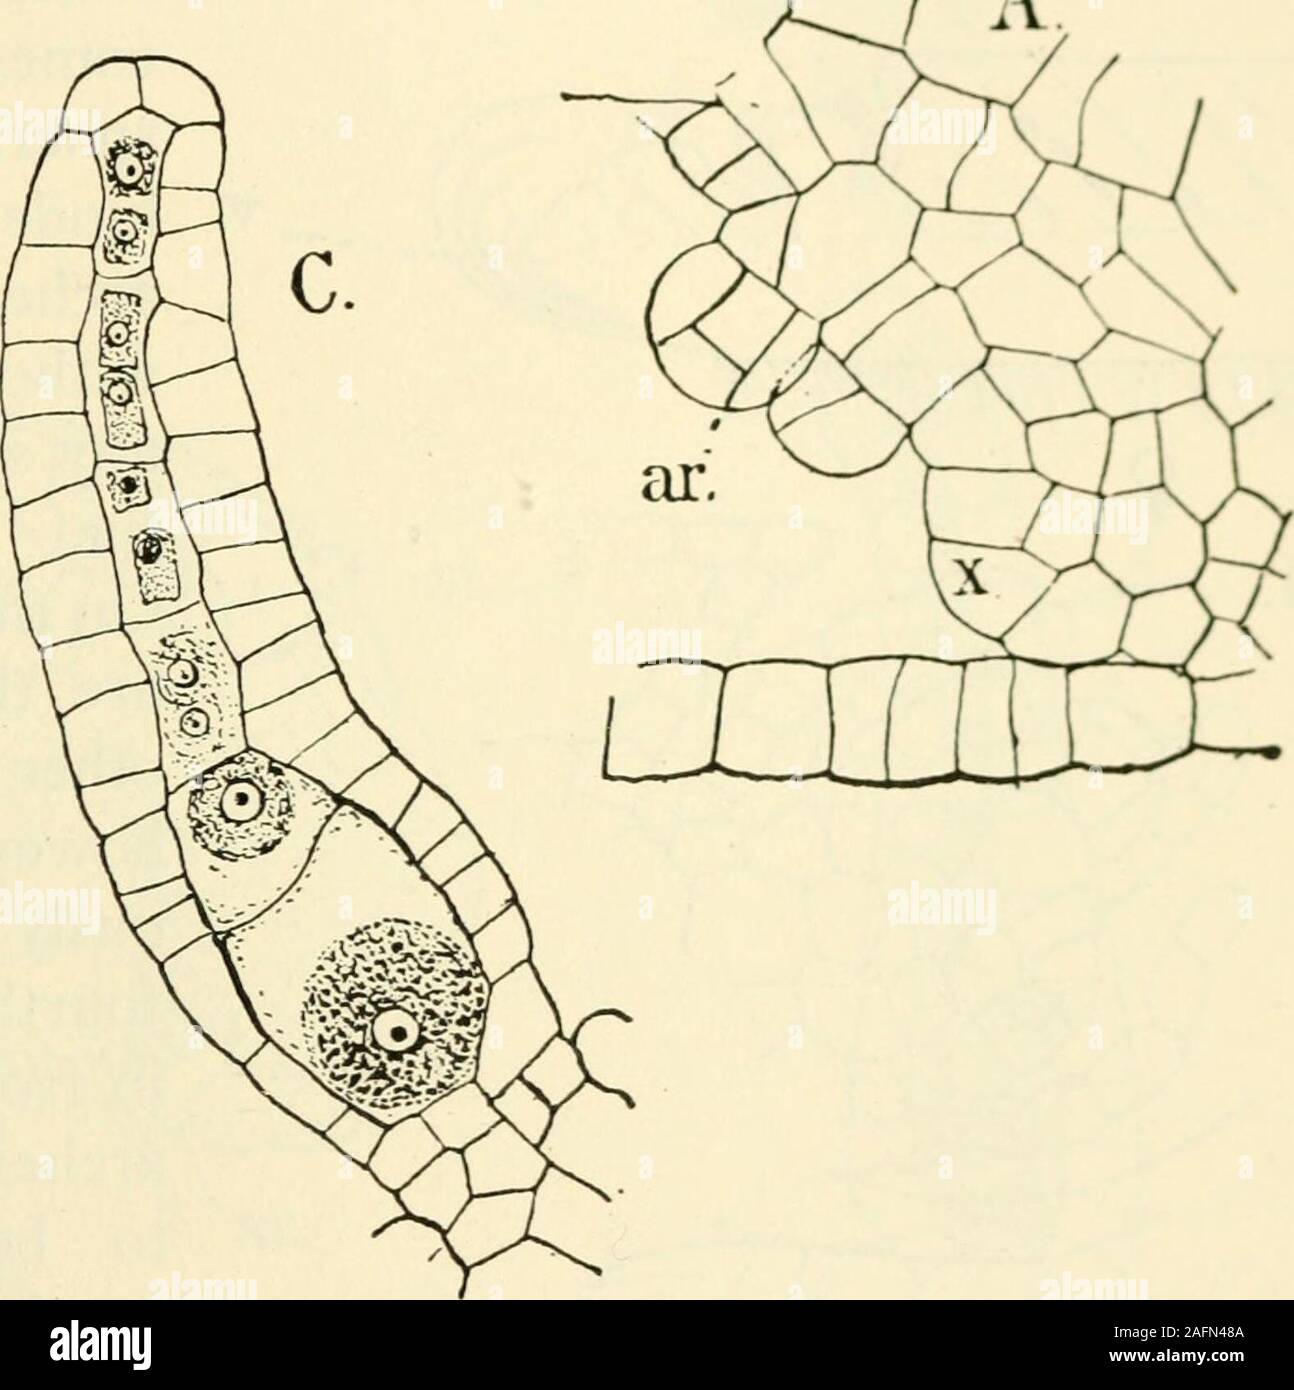 . The structure and development of mosses and ferns (Archegoniatae). Fig. 19.—Targionia hypophylla. A, Longitudinal section of the apex of the thallus,with young archegonia (ar), X525; x, the apical cell; B, young, C, older archc-gonium in longitudinal section; D, cross-section of the archegonium neck, X5-5- Stains very intensely. As the archegonium of Targioiiiamatures, its neck elongates rapidly and bends forward andupward, no doubt an adaptation to facilitate the entrance ofthe spermatozoid. A similar curving of the archegonium neckis observed in other forms wdiere the archegonium is upon t Stock Photo